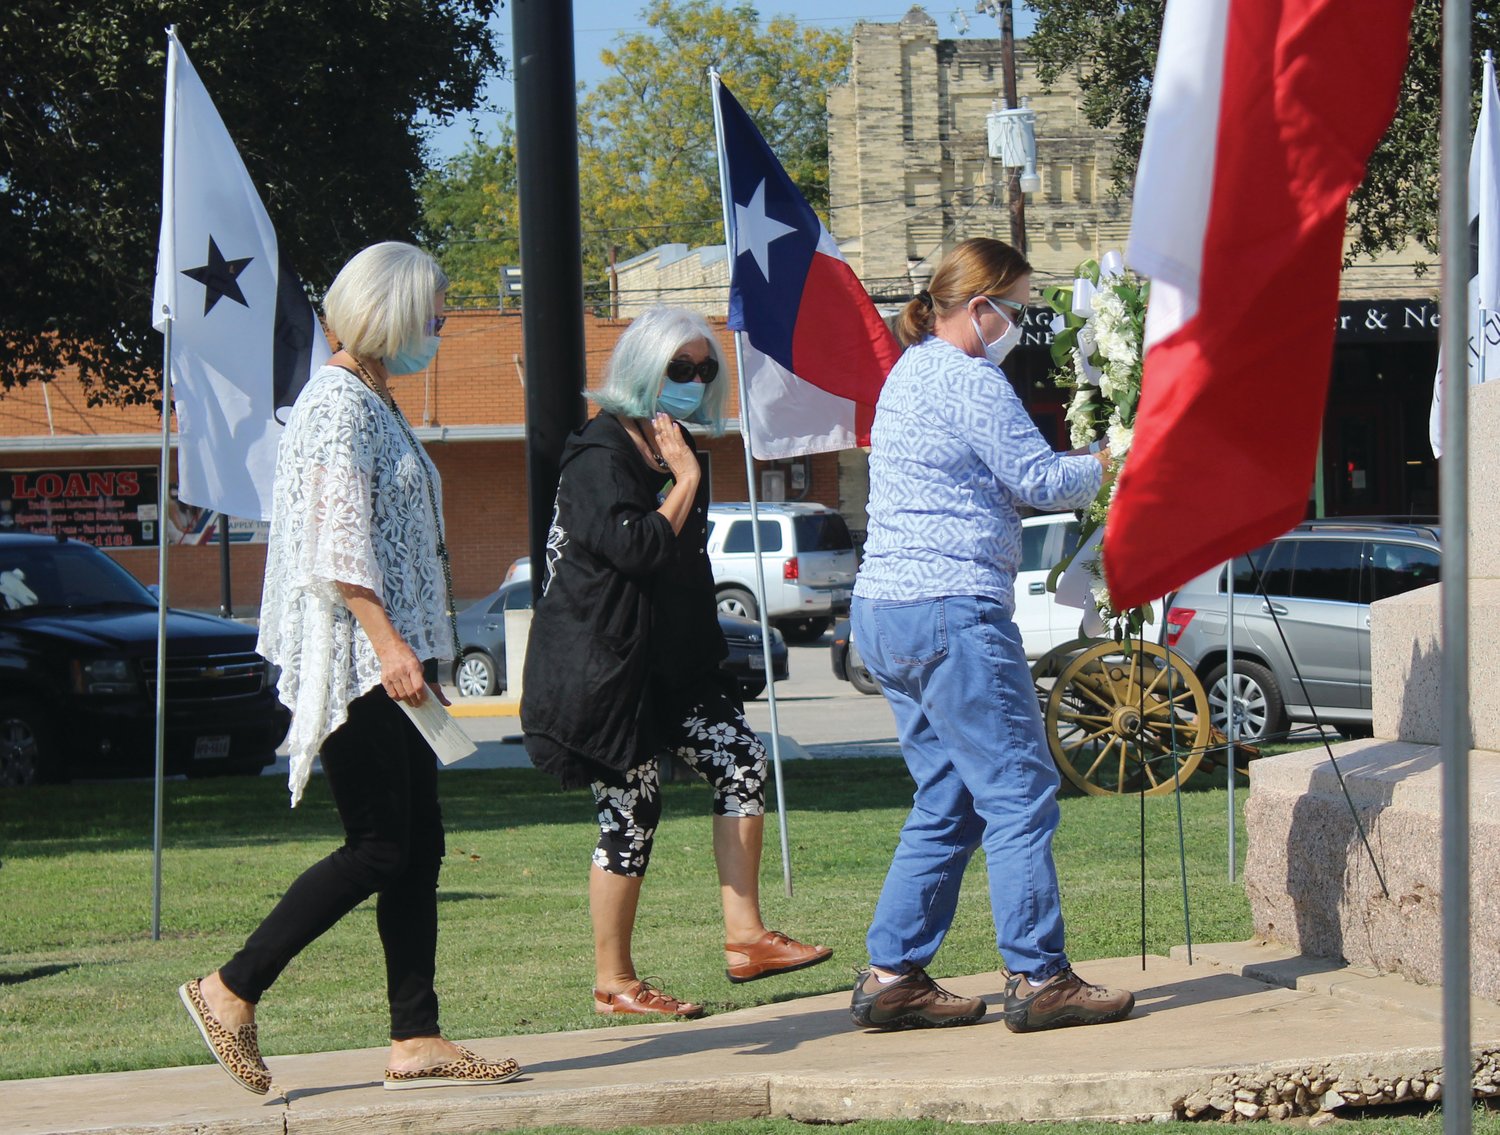 Carla Hornseth, Carole Dahlberg and Candy Allen, as new members of the Daughters of the Republic of Texas, placed a memorial wreath at the base of the monument in Texas Heroes square.